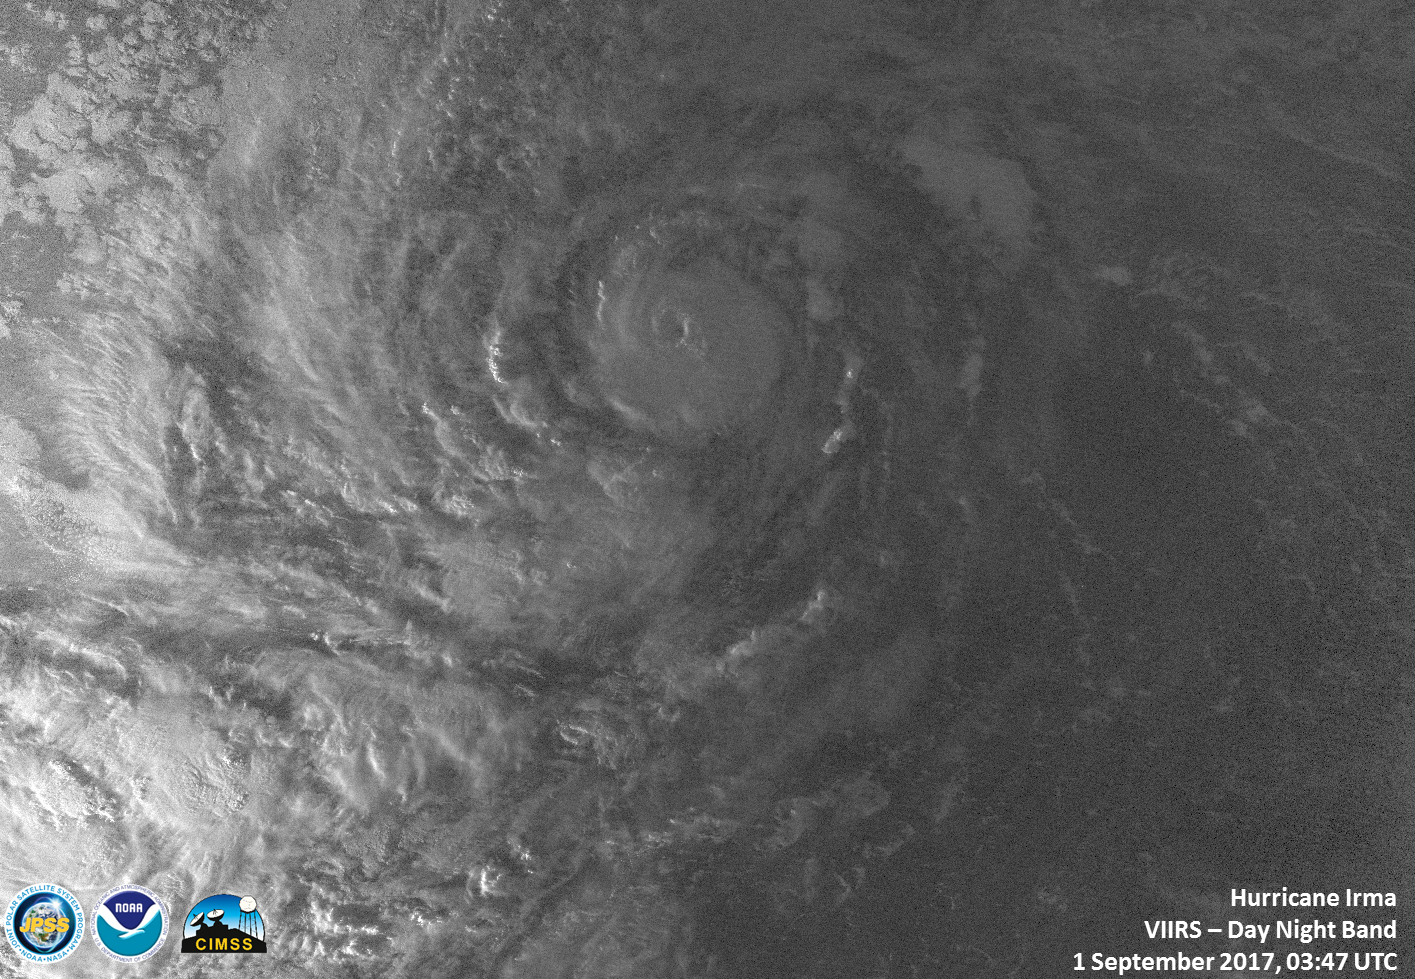 Nighttime infrared image of Irma in black and white. The clouds fill the entire image.